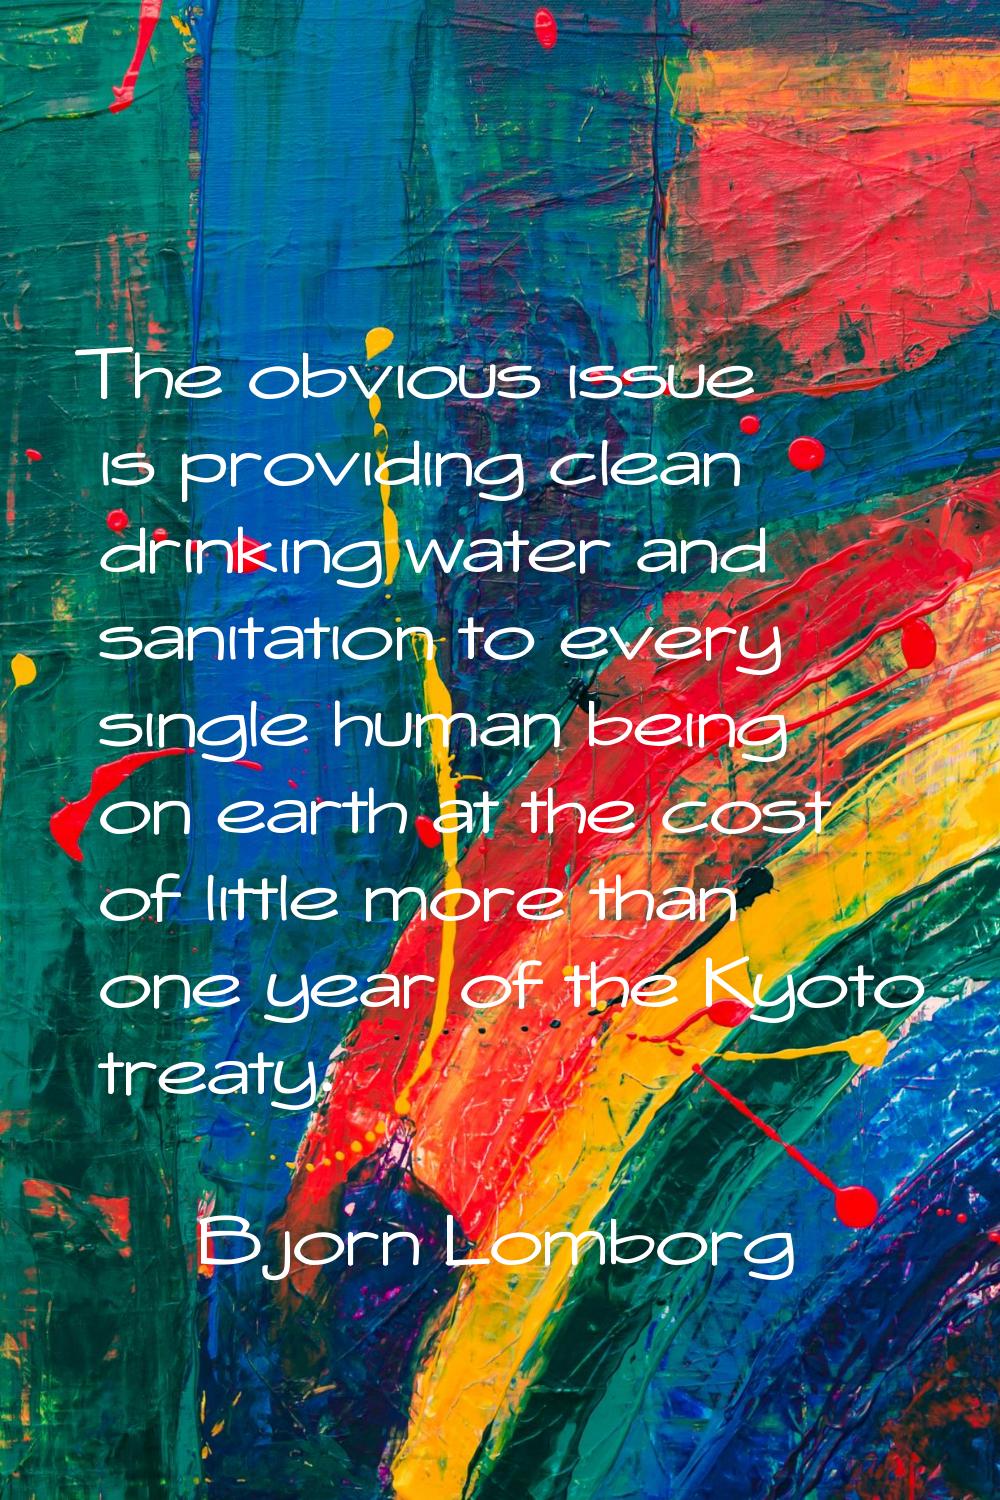 The obvious issue is providing clean drinking water and sanitation to every single human being on e